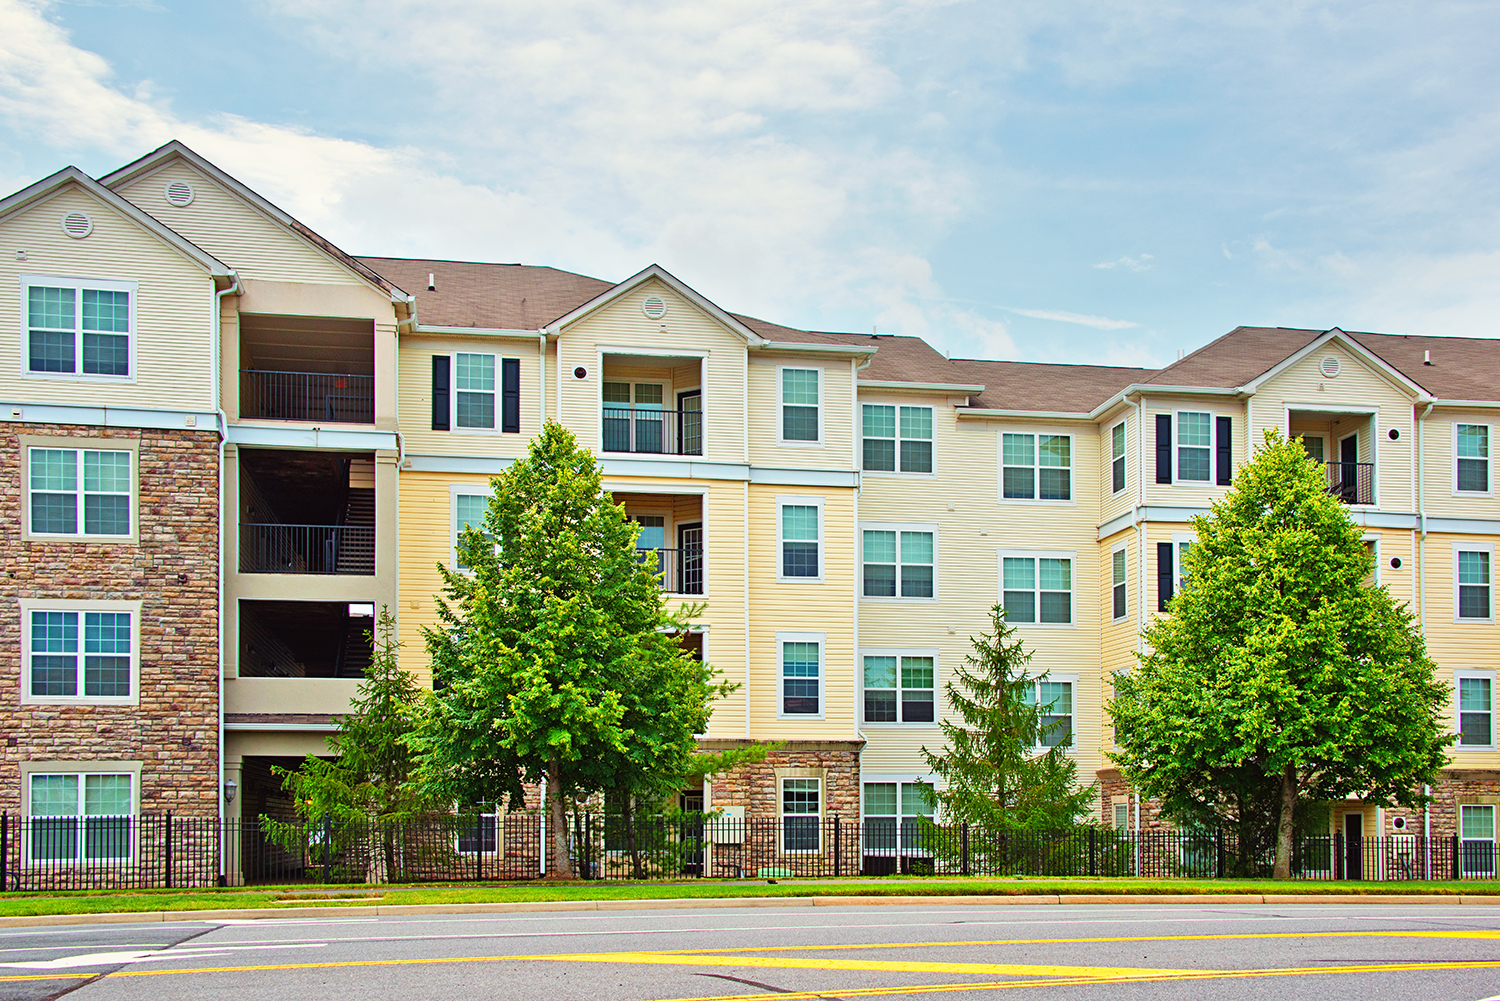 Condo Insurance for Homeowners in Missouri and the Midwest